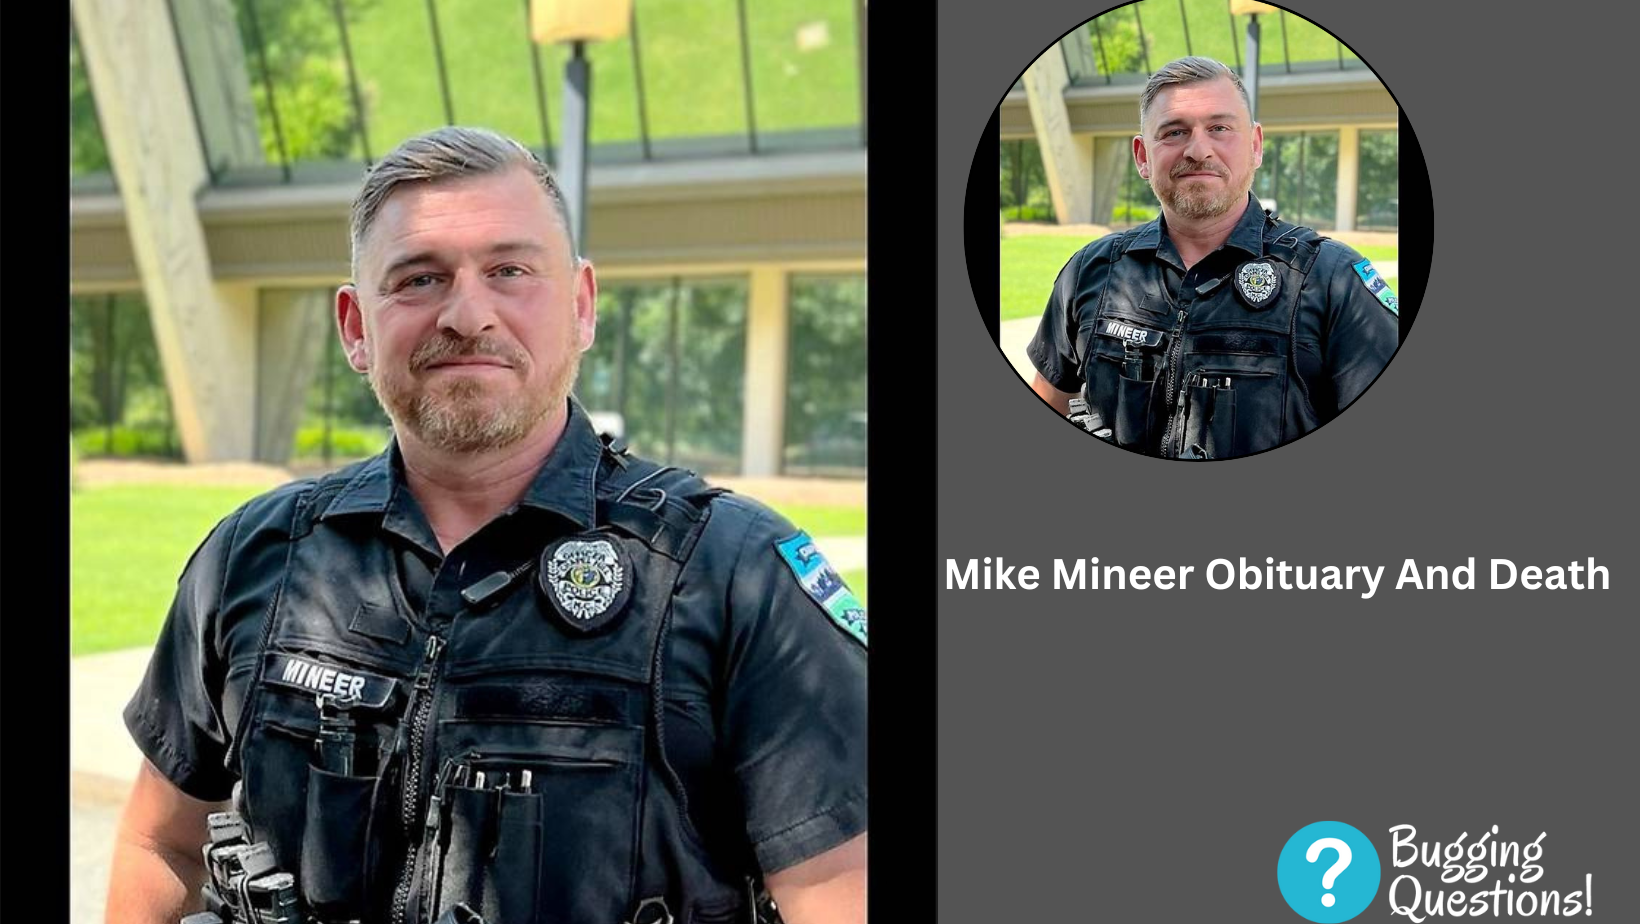 Mike Mineer Obituary And Death